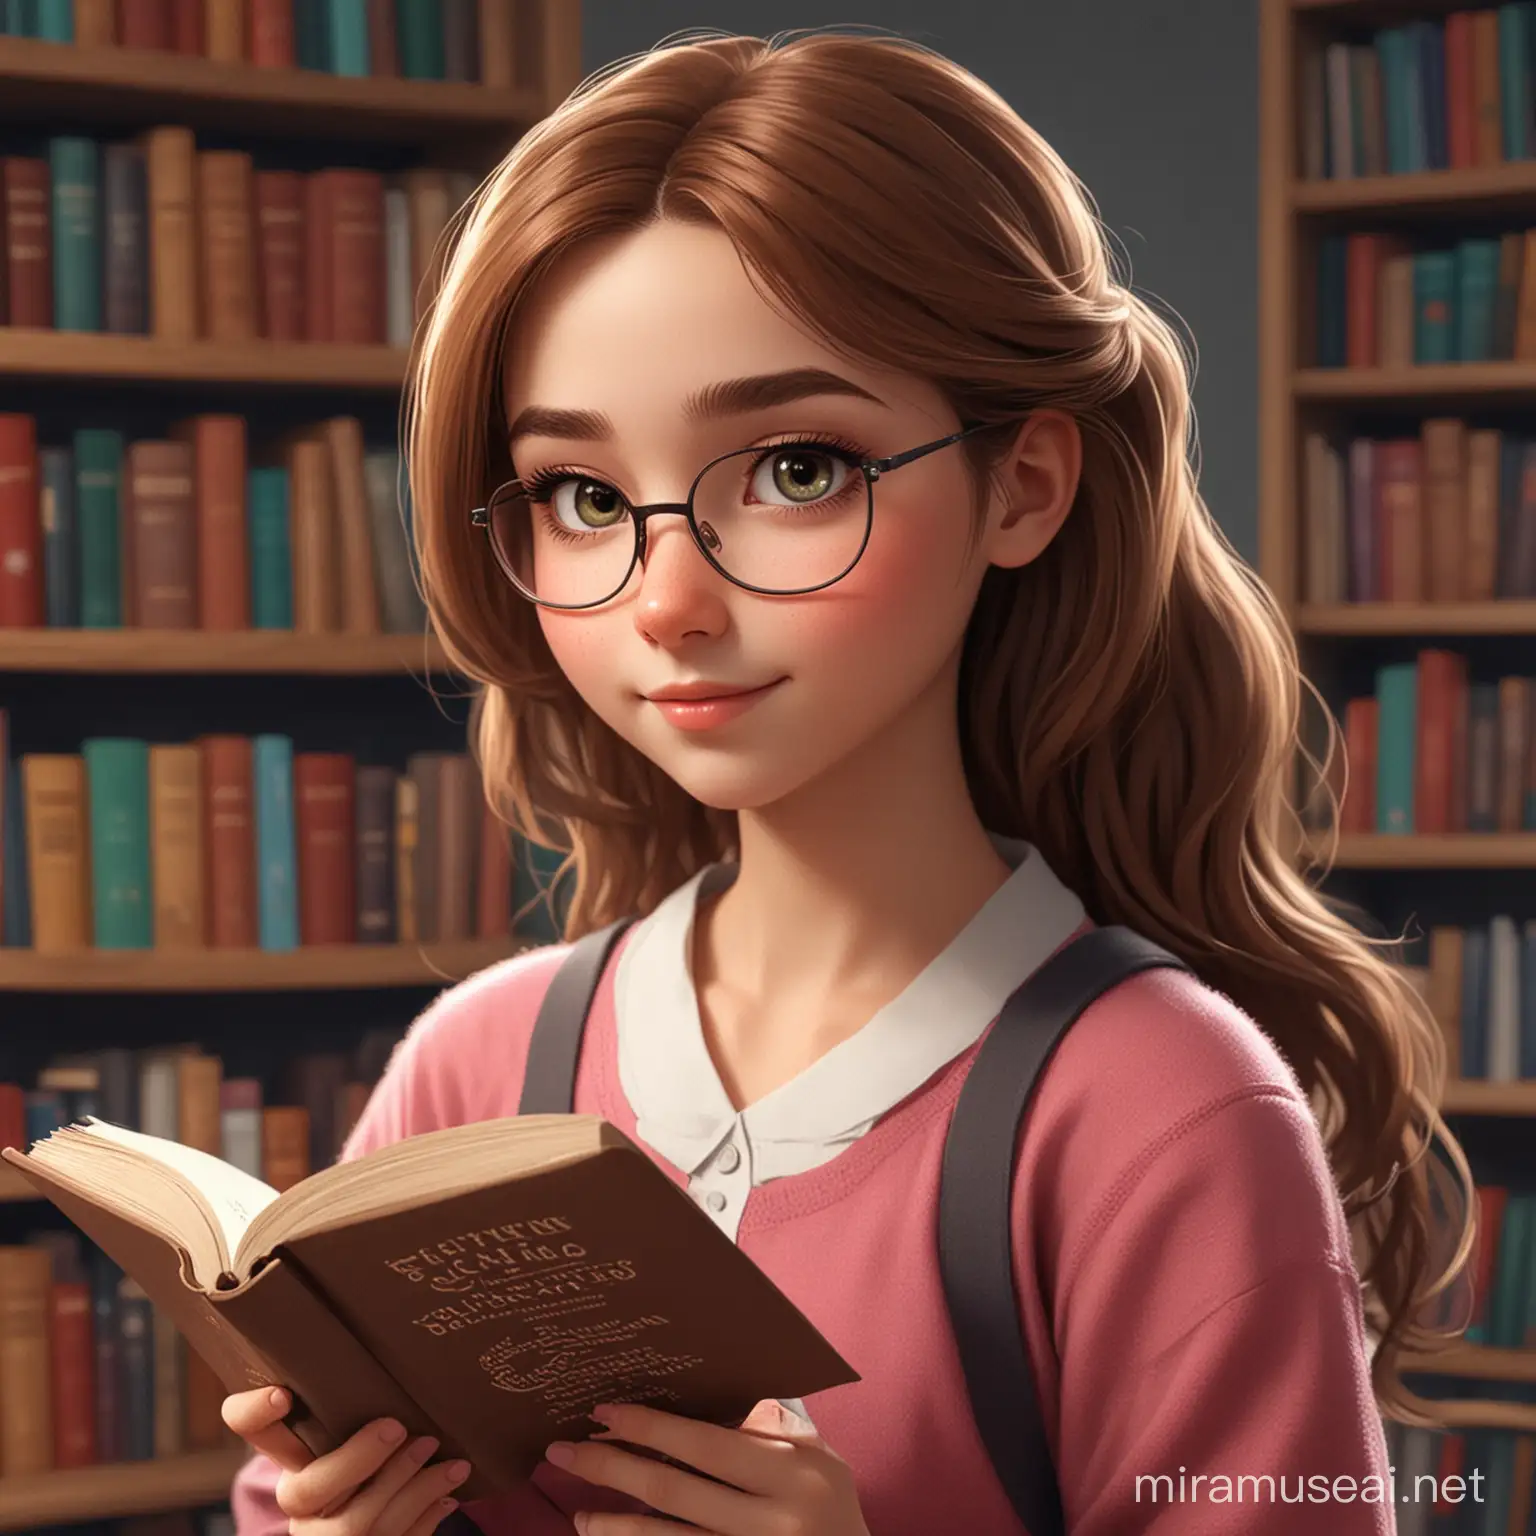 create a character of a girl who enjoy reading books